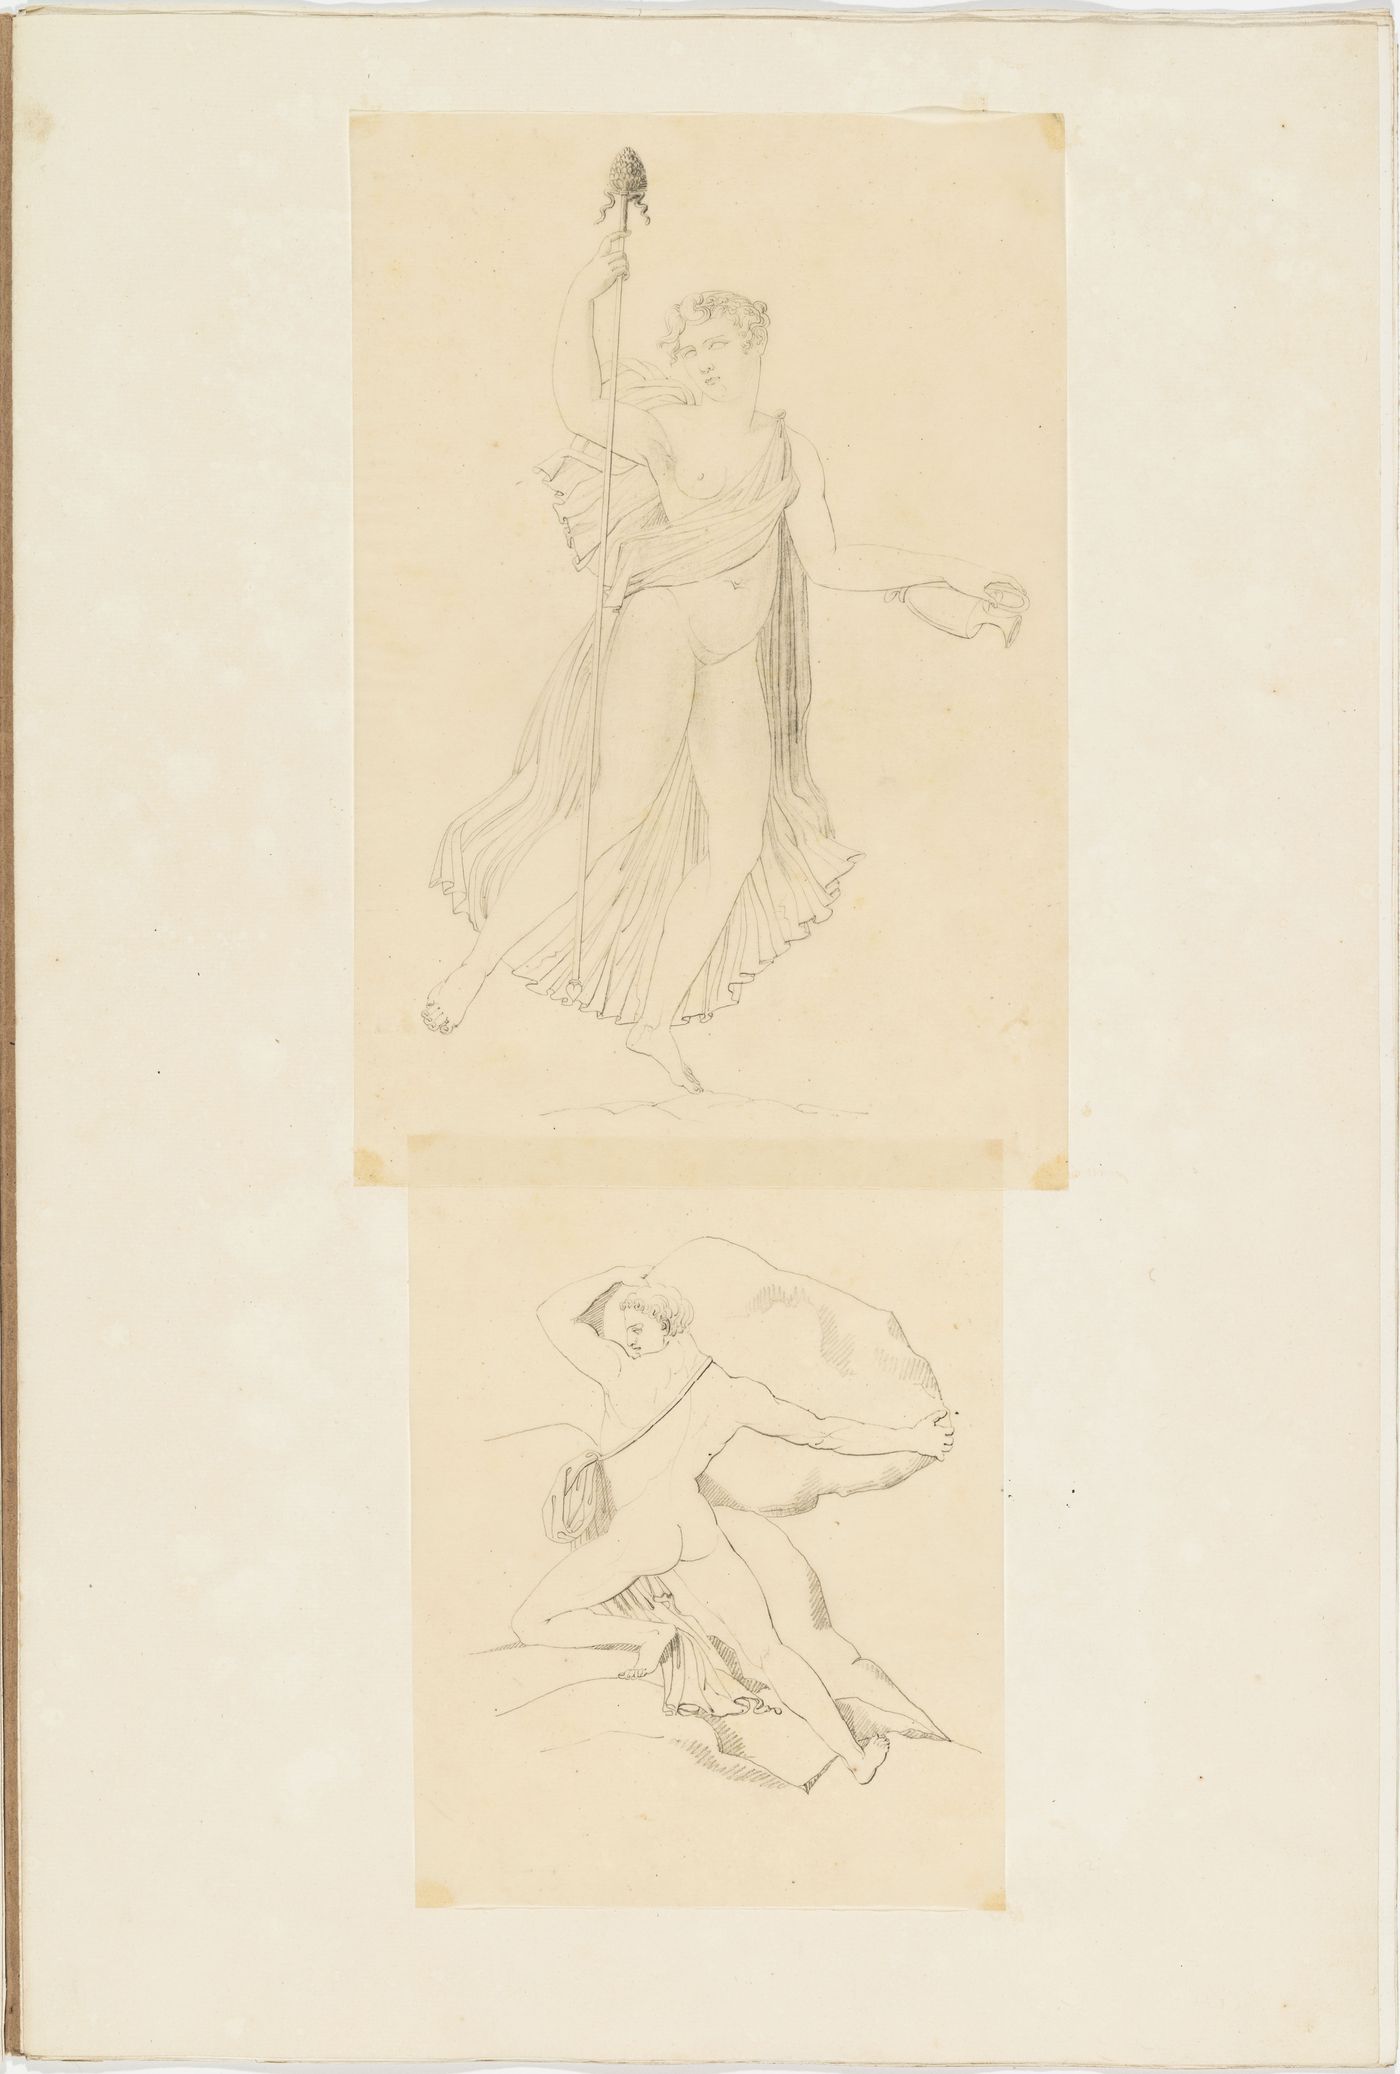 Drawing of a female figure holding a vase and staff, probably Venus, and a drawing of a nude male figure holding a boulder, probably Theseus or Sisyphus